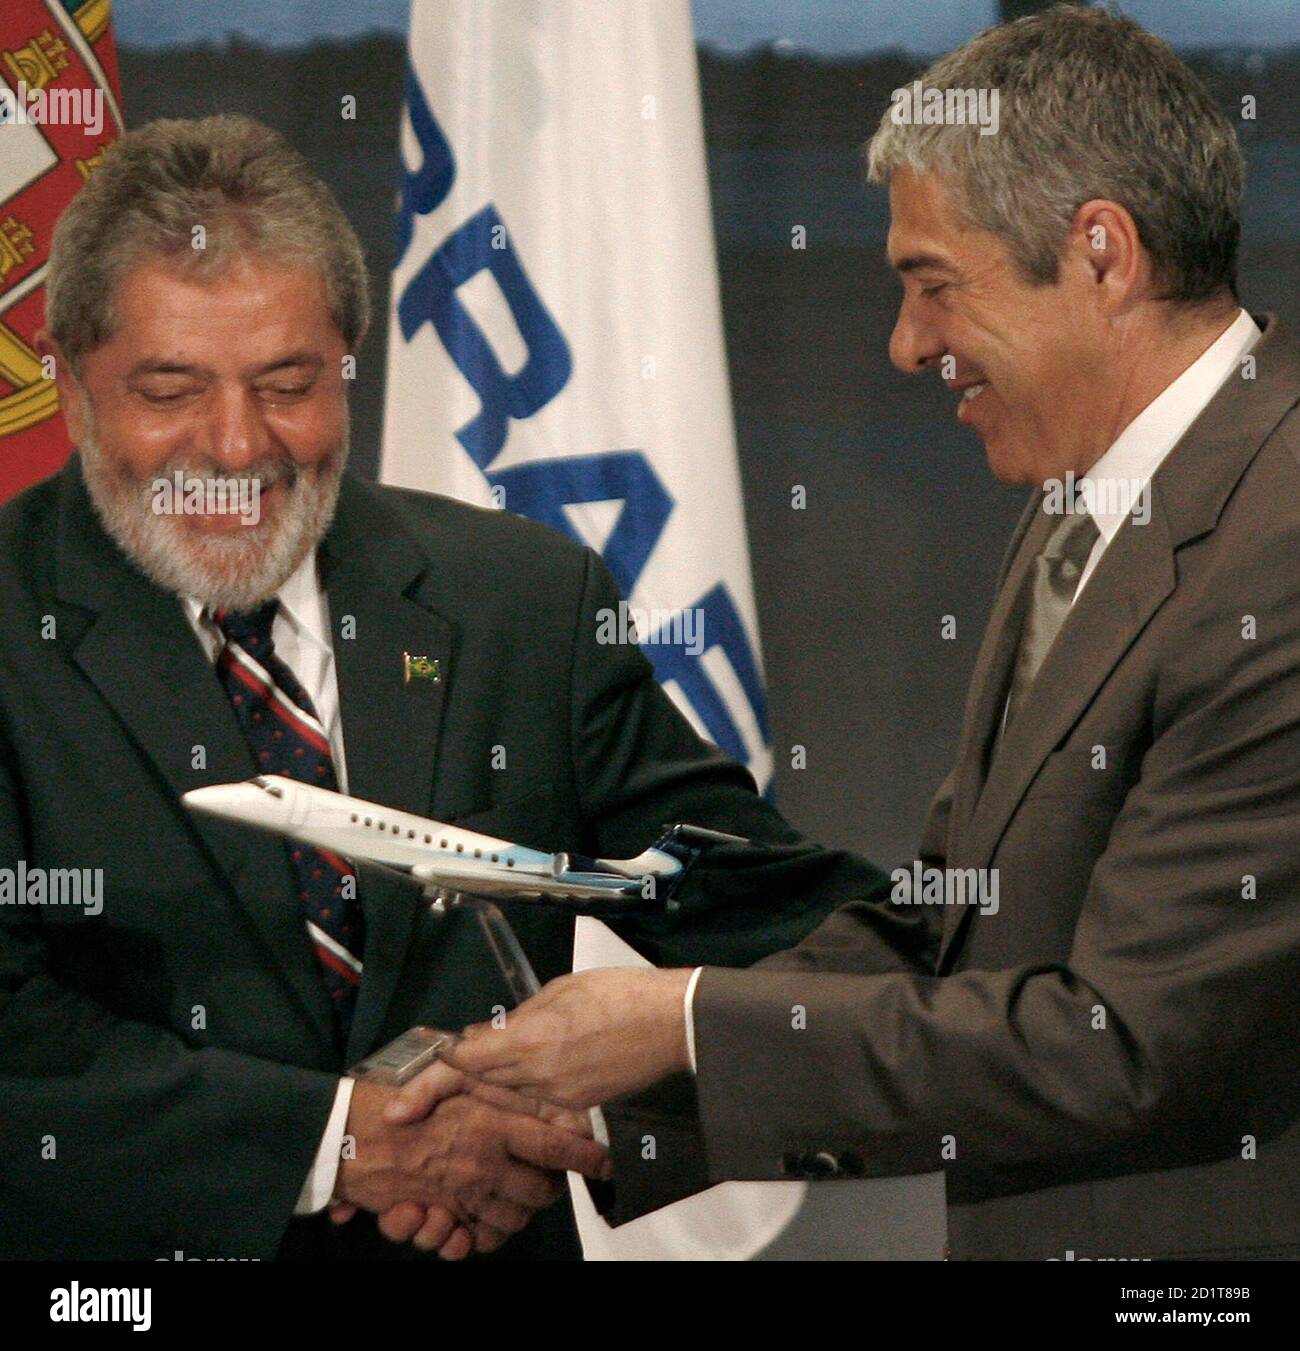 Brazil's President Luiz Inacio Lula da Silva (L) shakes hands with Portugal's Prime Minister Jose Socrates after a cooperation agreement in Lisbon July 26, 2008. Brazil's Embraer, the world's third-biggest commercial jet maker, said on Saturday it would invest 148 million euros in two components plants in Portugal to expand its operation in Europe, now mainly focused on aircraft servicing. REUTERS/Nacho Doce (PORTUGAL) Stock Photo